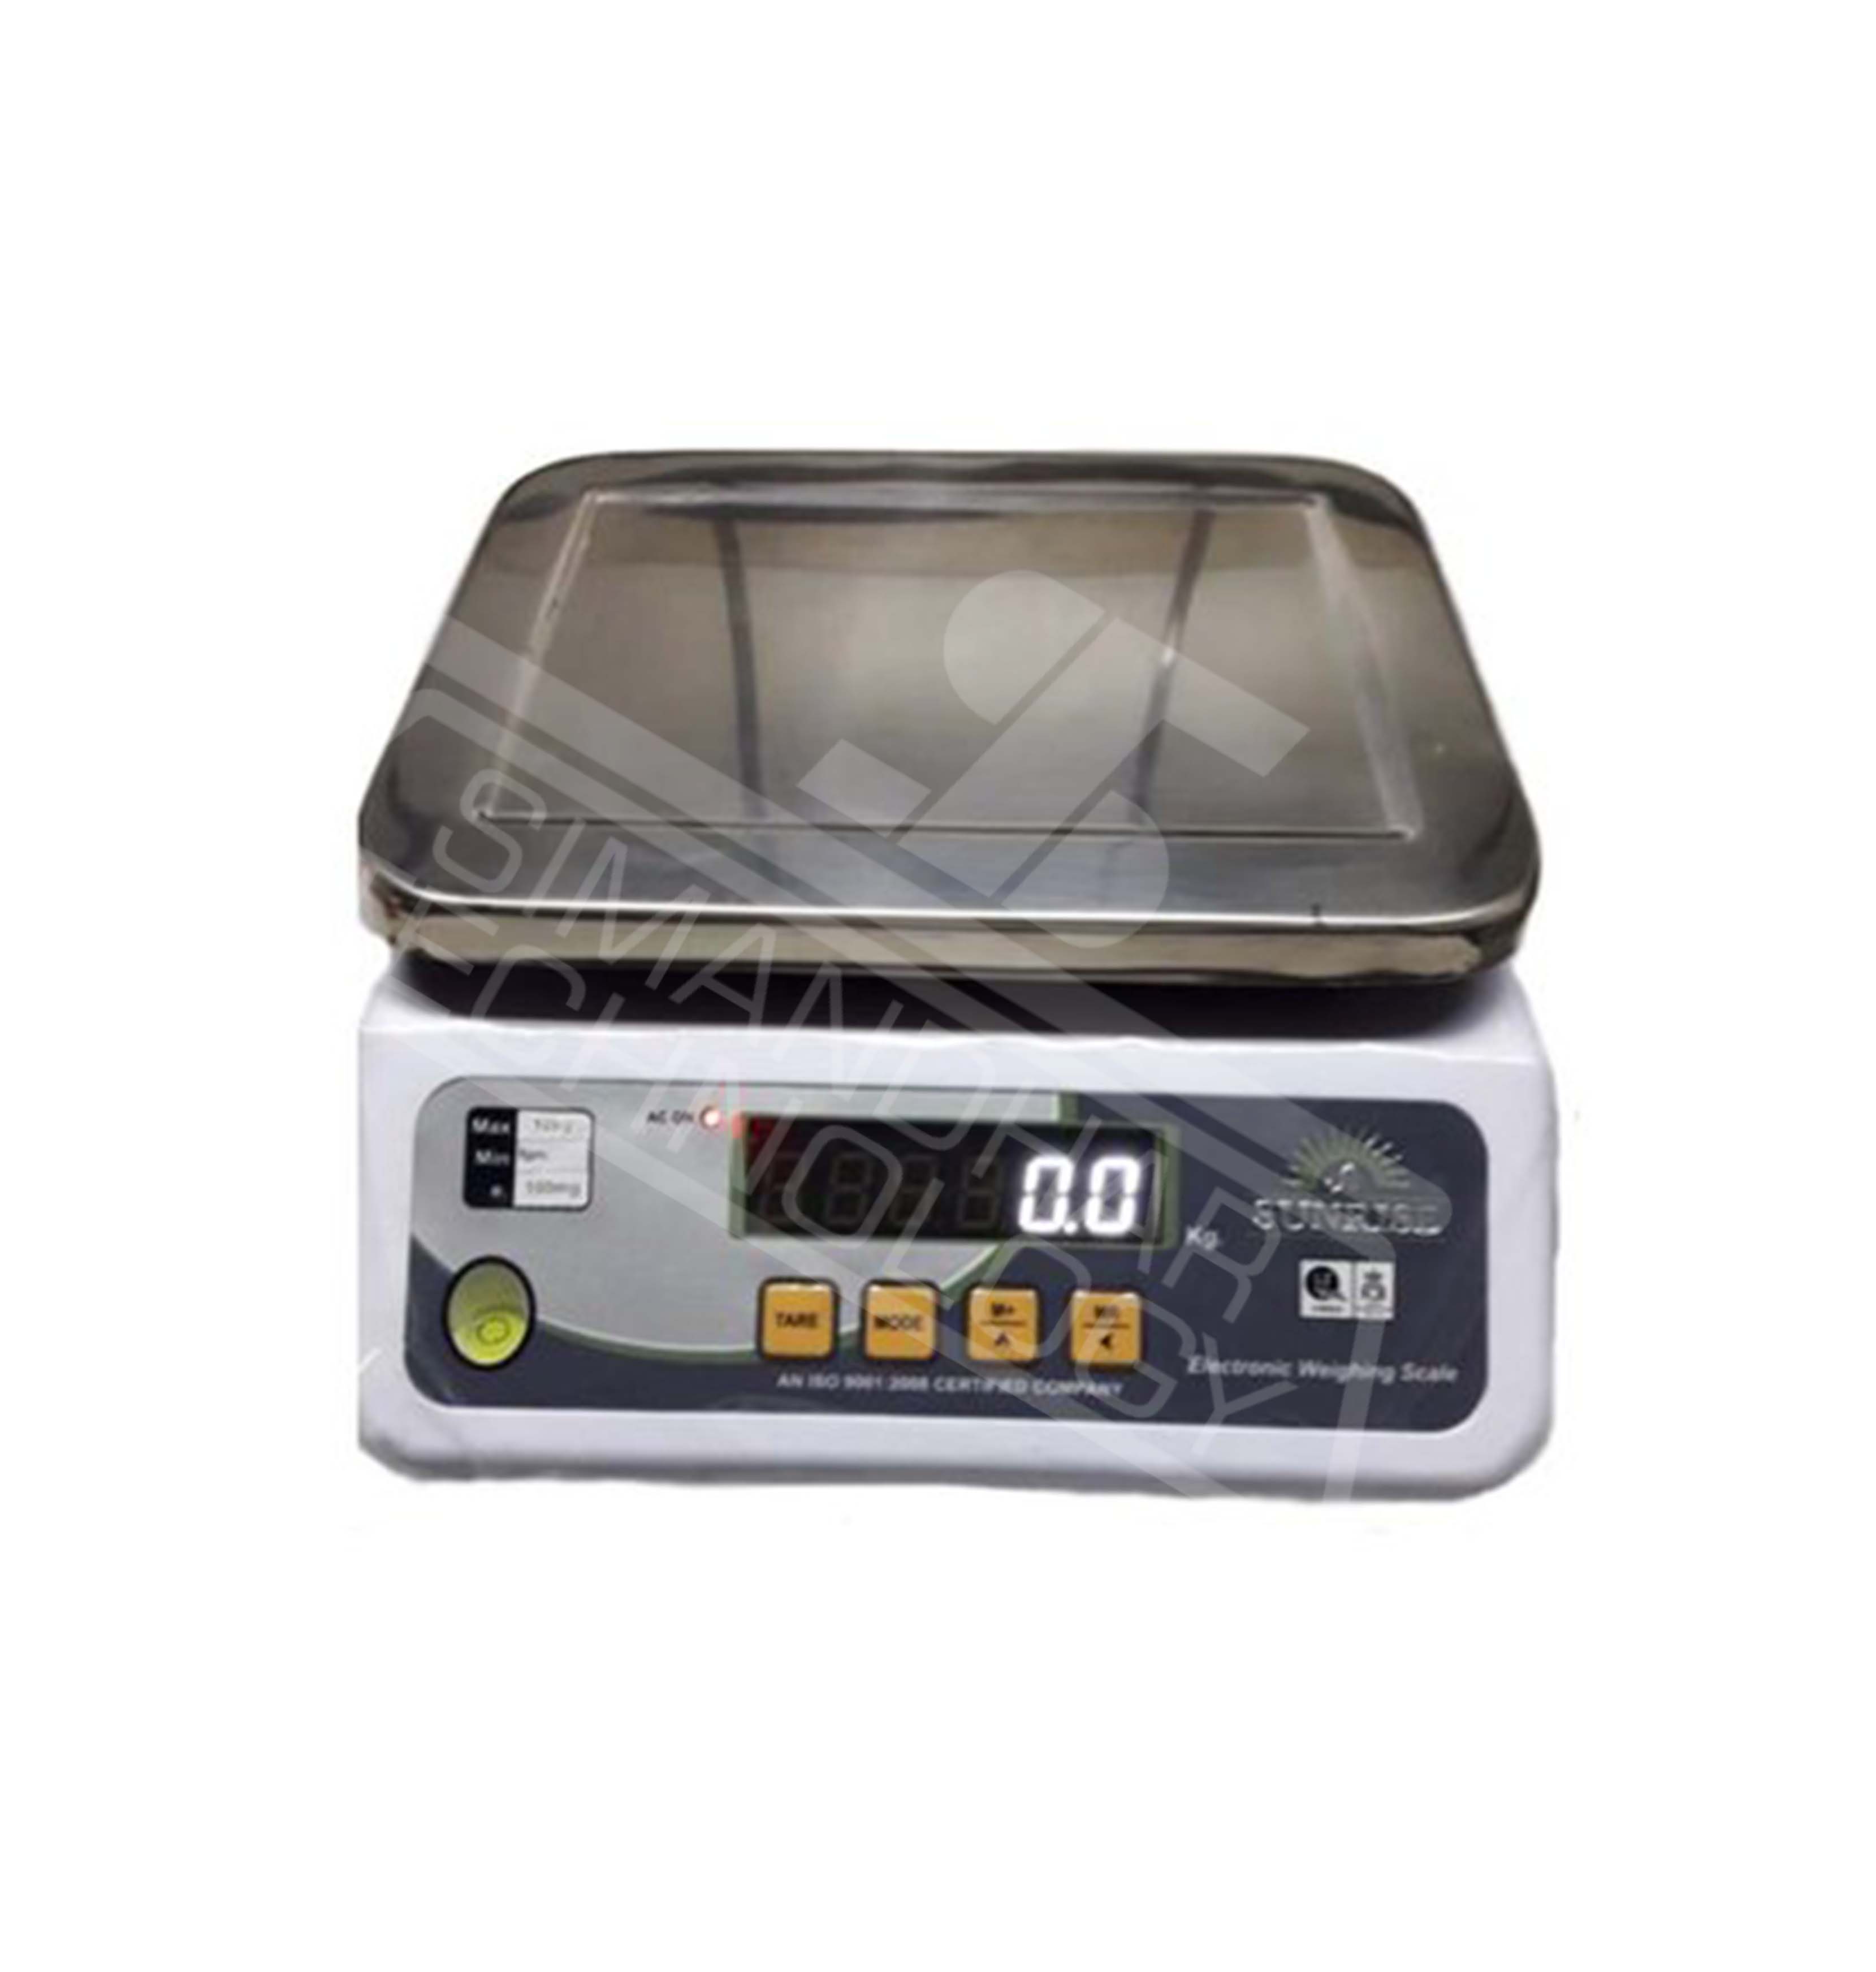 Jewellery Weighing Scale Manufacturer in India